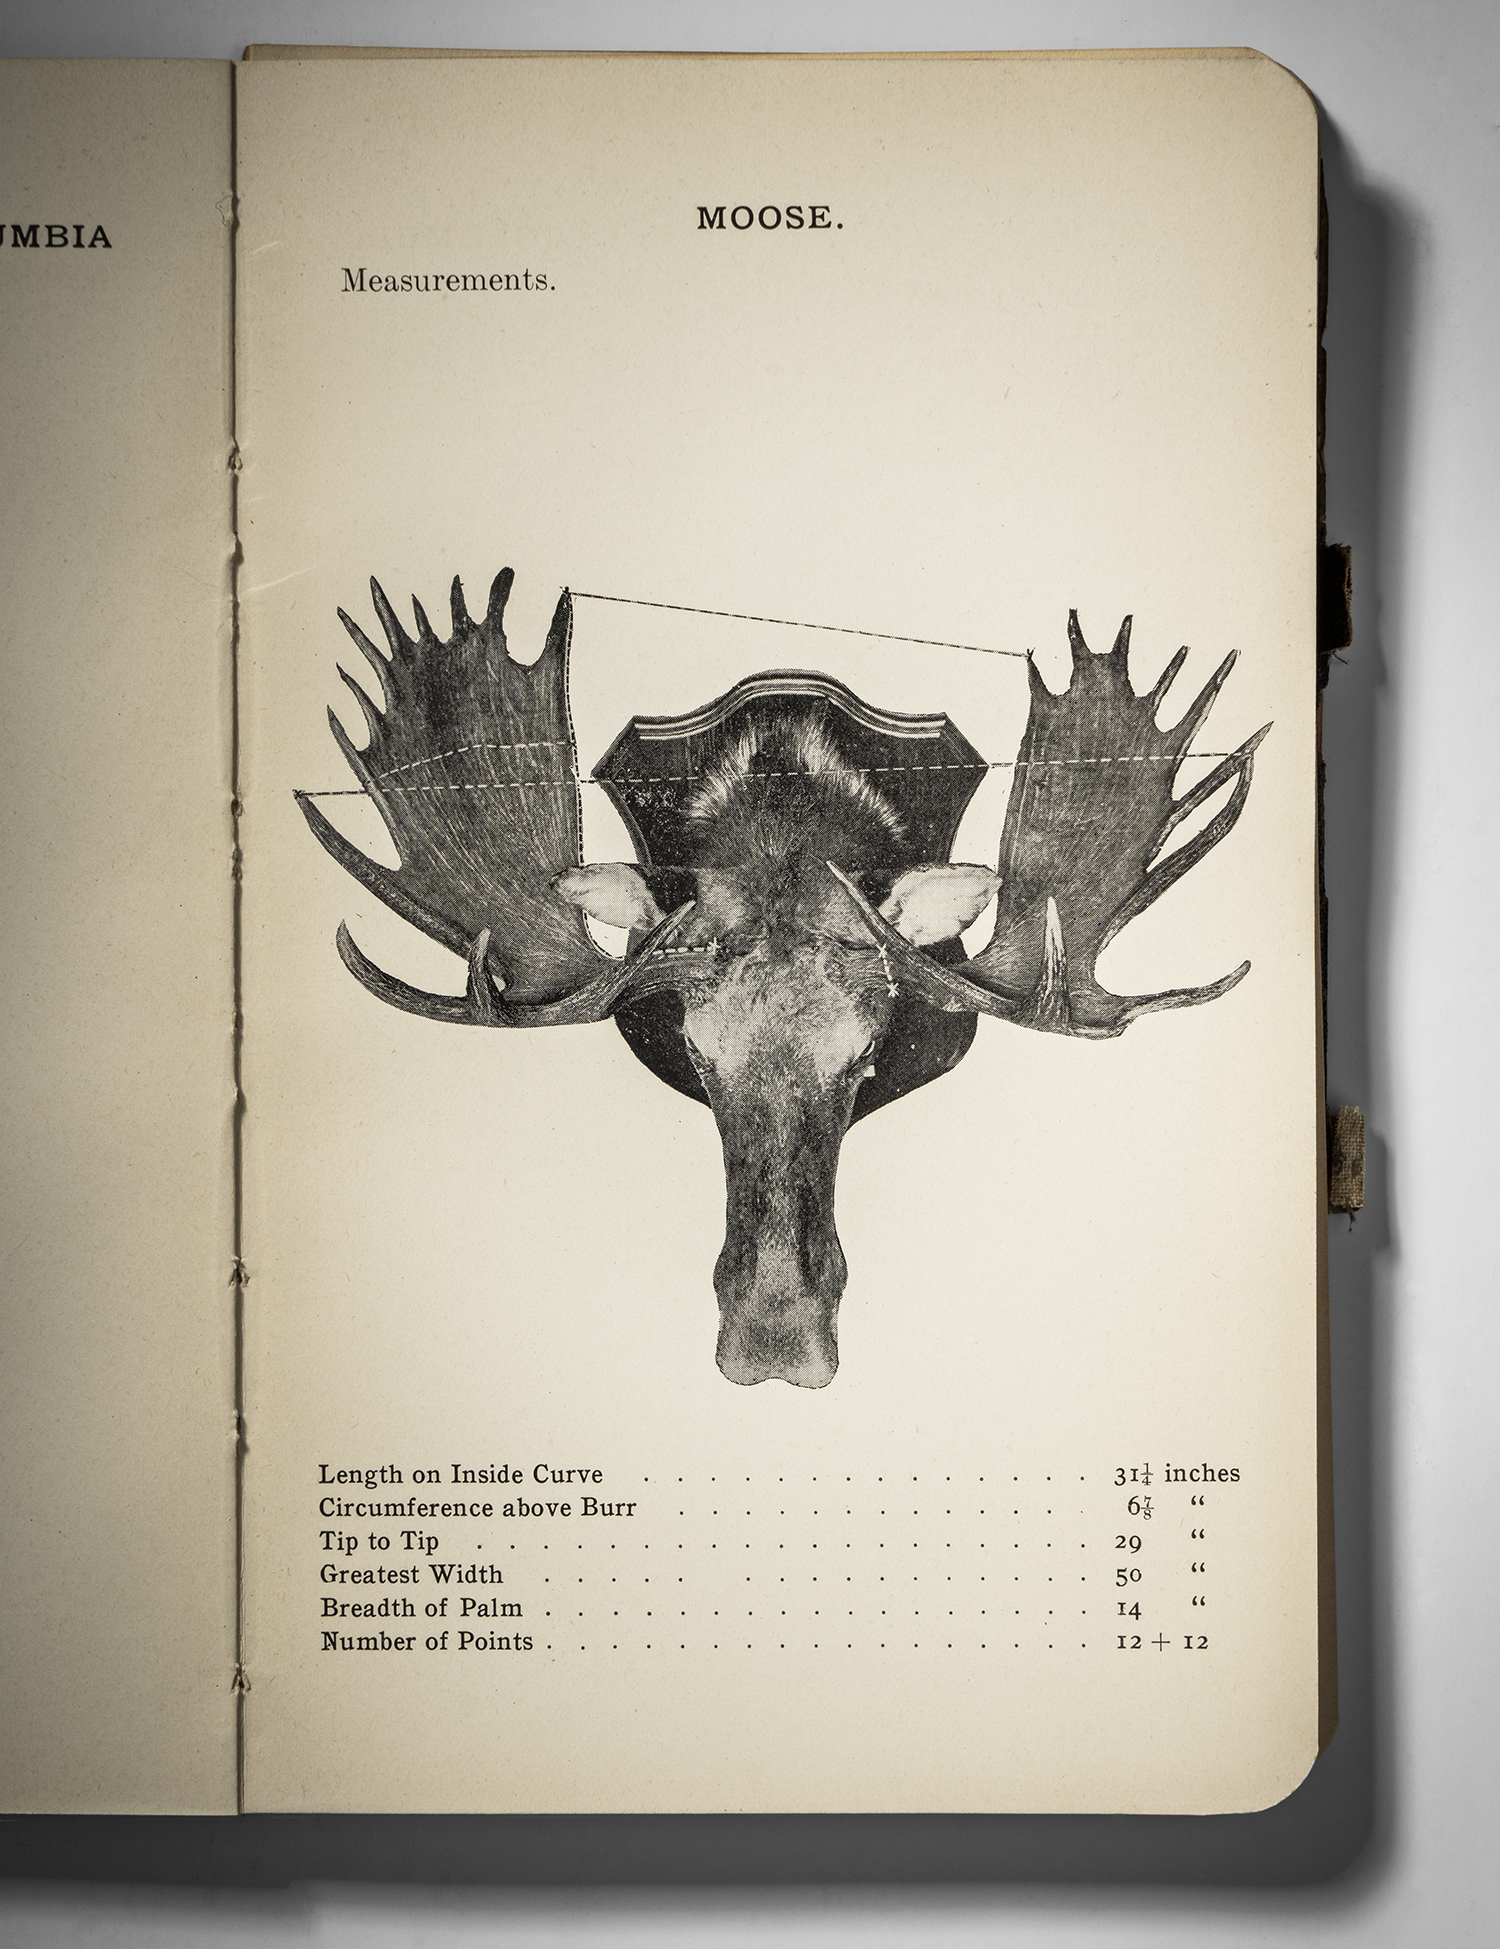 A historical book from the Boone and Crockett library.